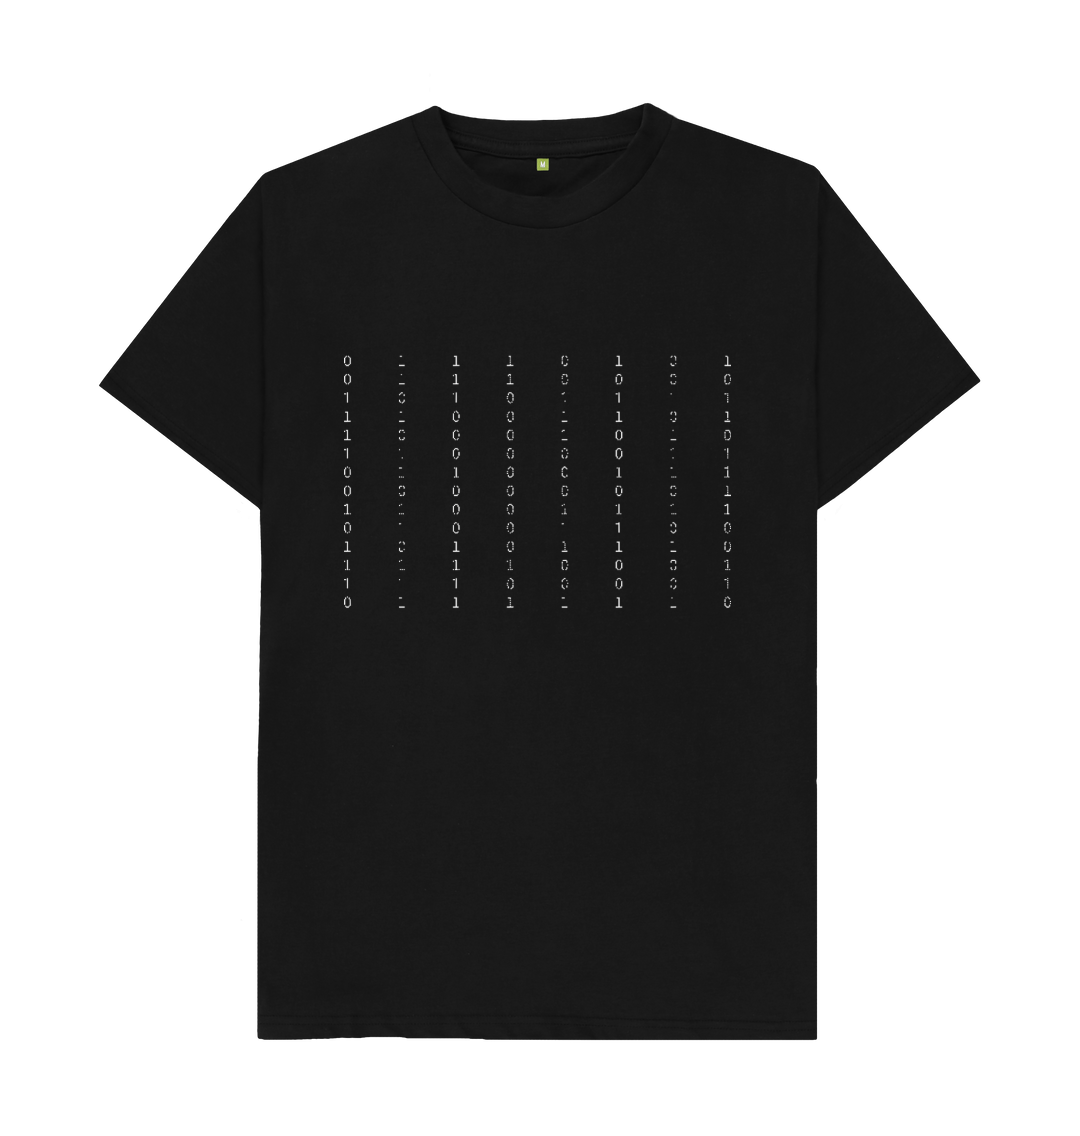 (A cascade of glitchy binary numbers drifts down the T-shirt)